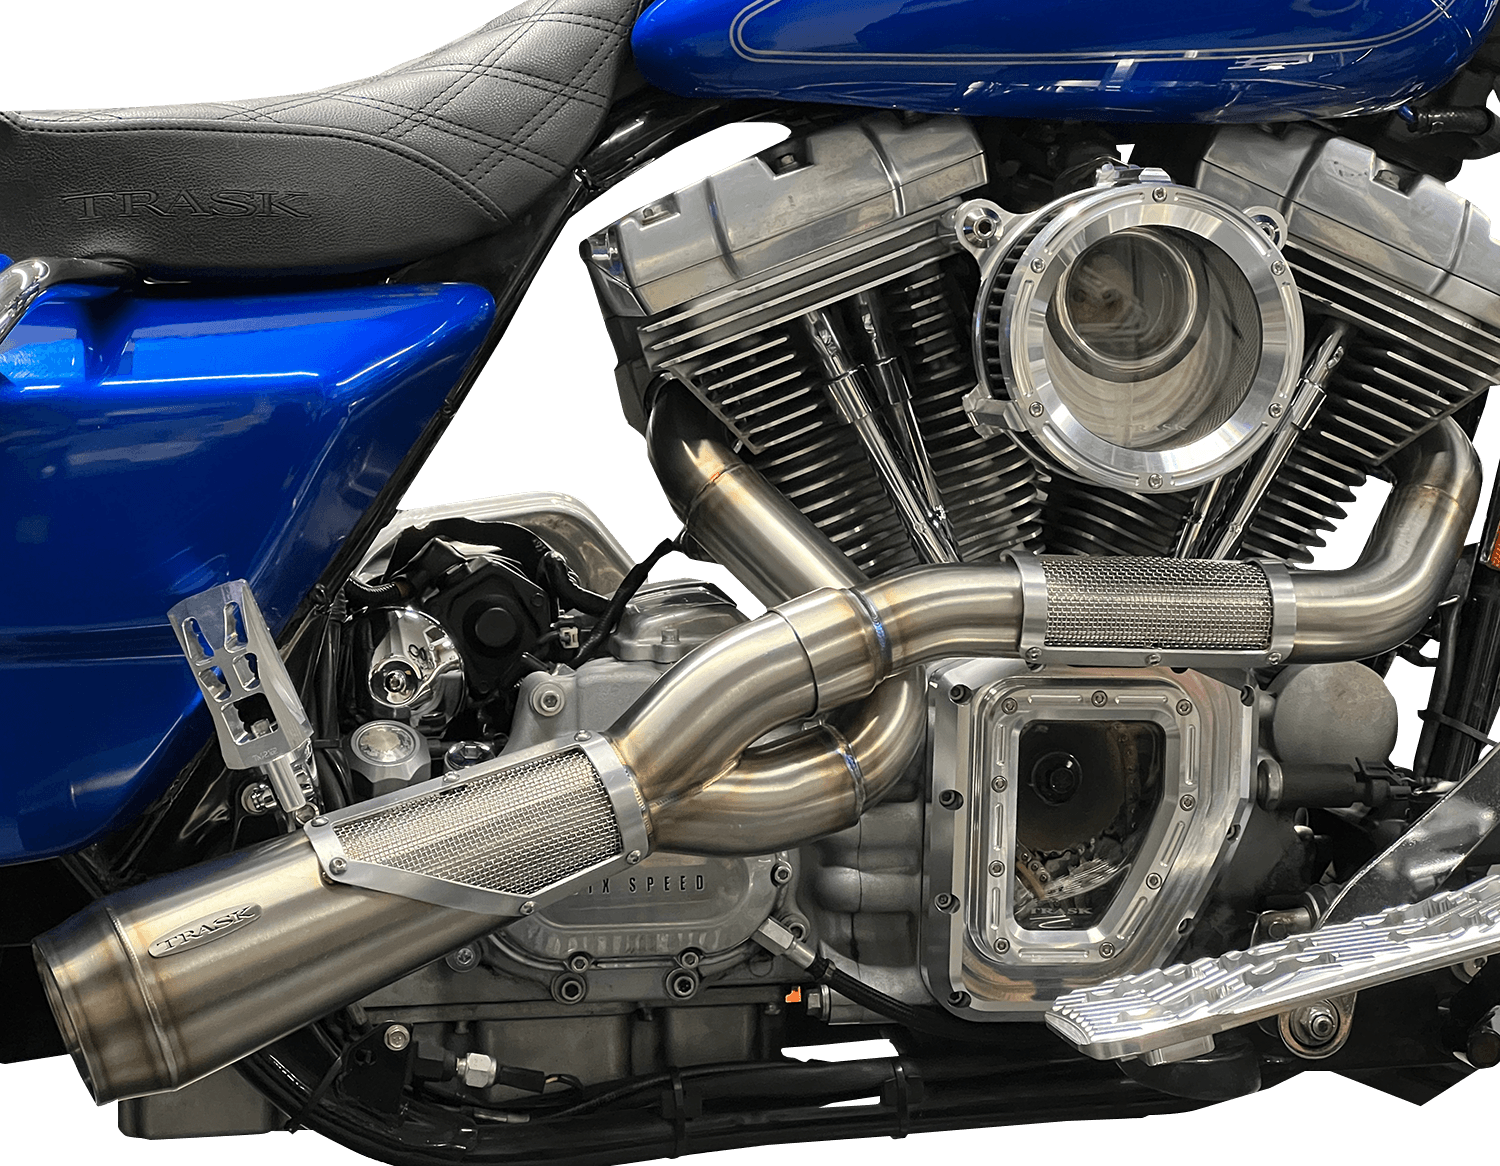 TRASK-Big Sexy 2:1 Performance Exhaust / '07-'16 Bagger-Exhaust - 2 into 1-MetalCore Harley Supply